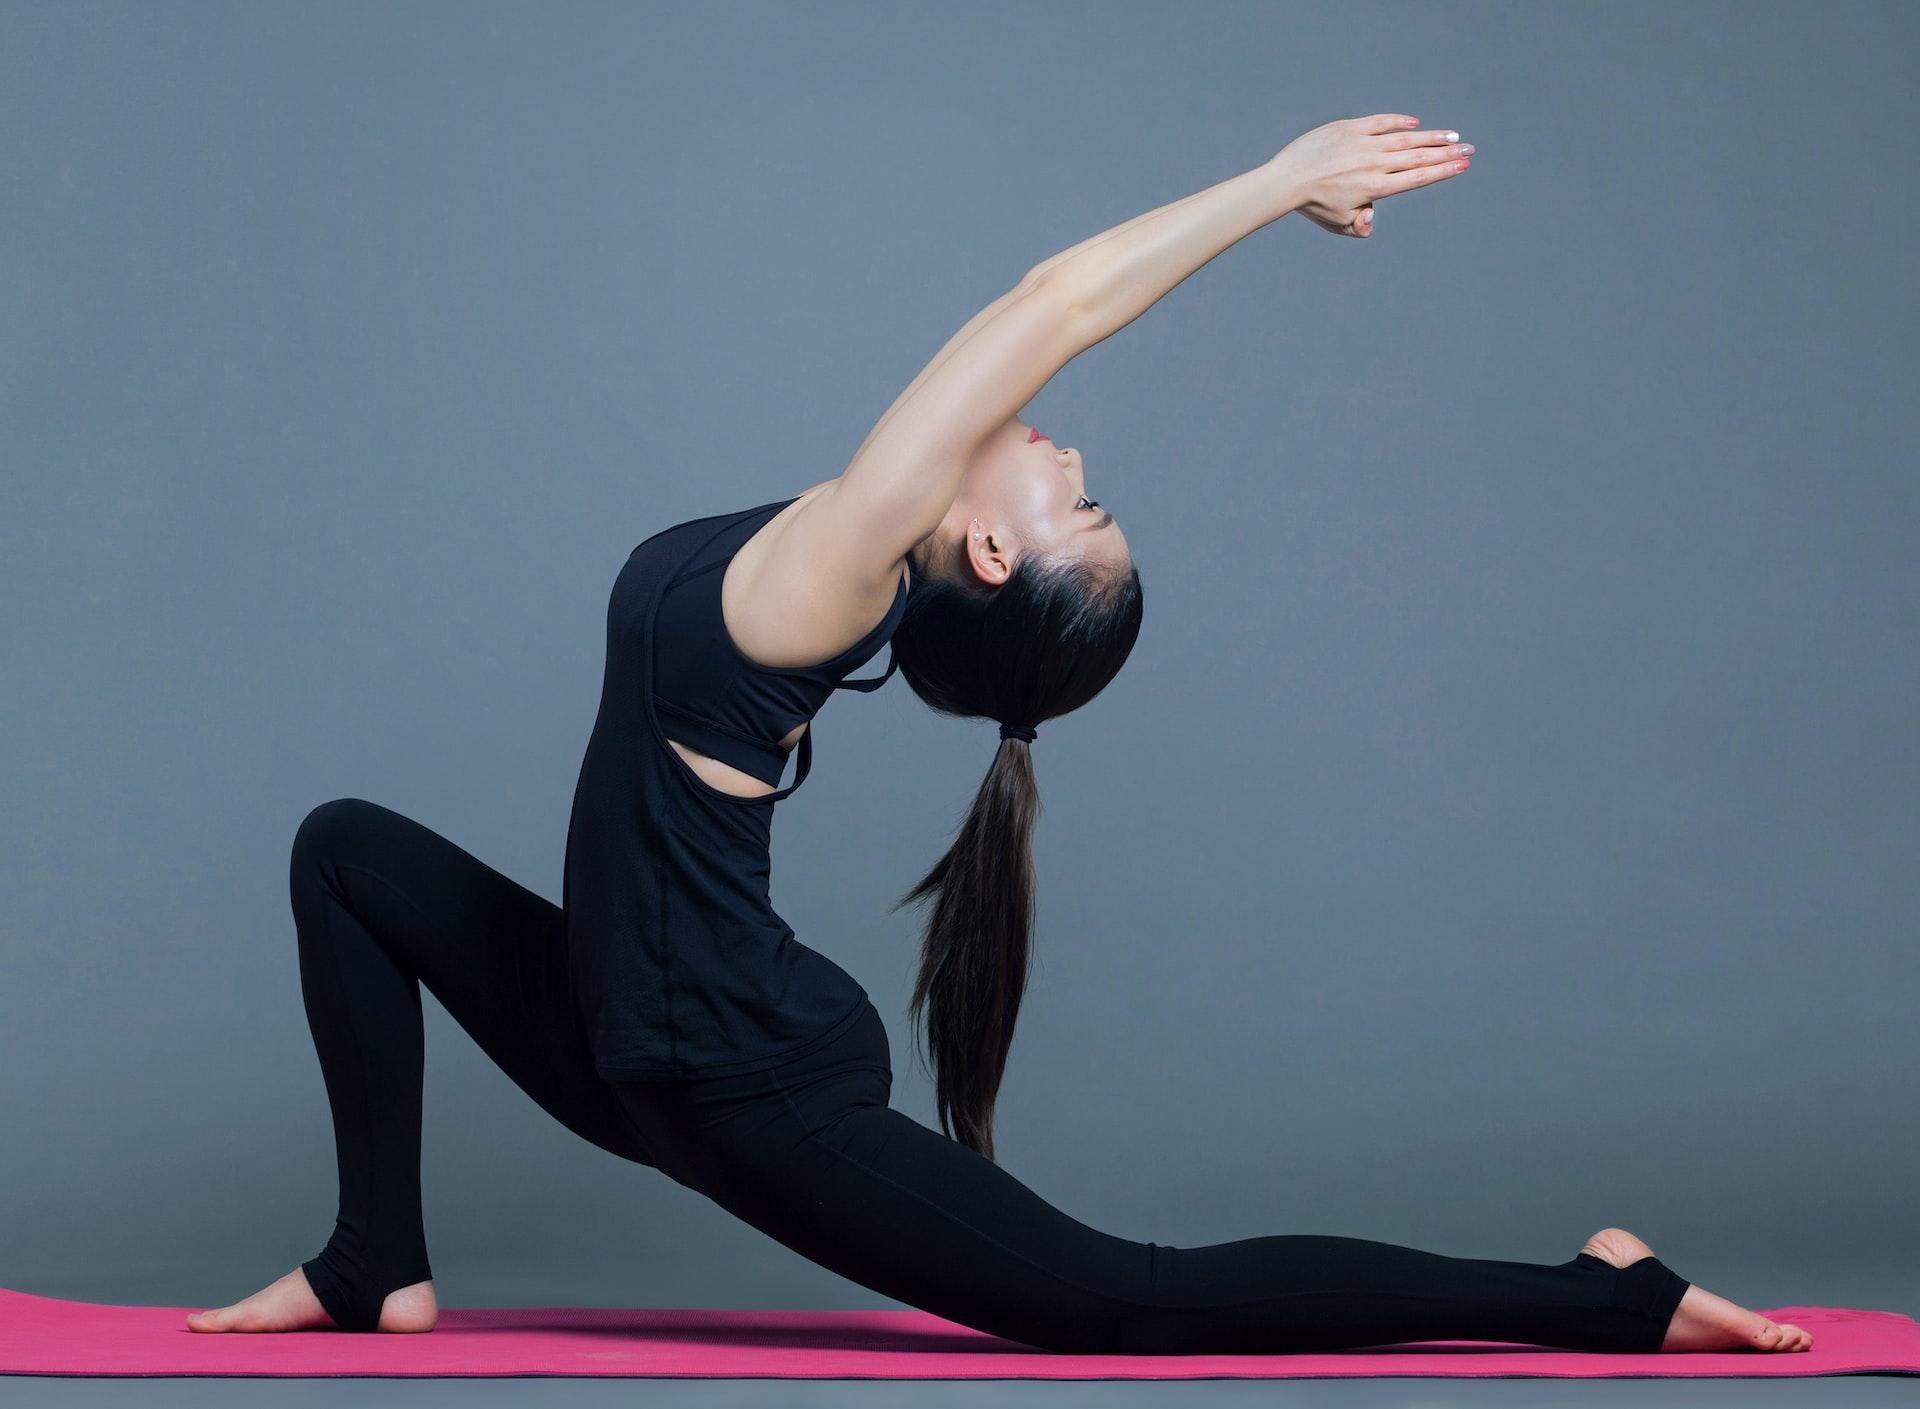 Most performed Yoga Poses For Beginners.